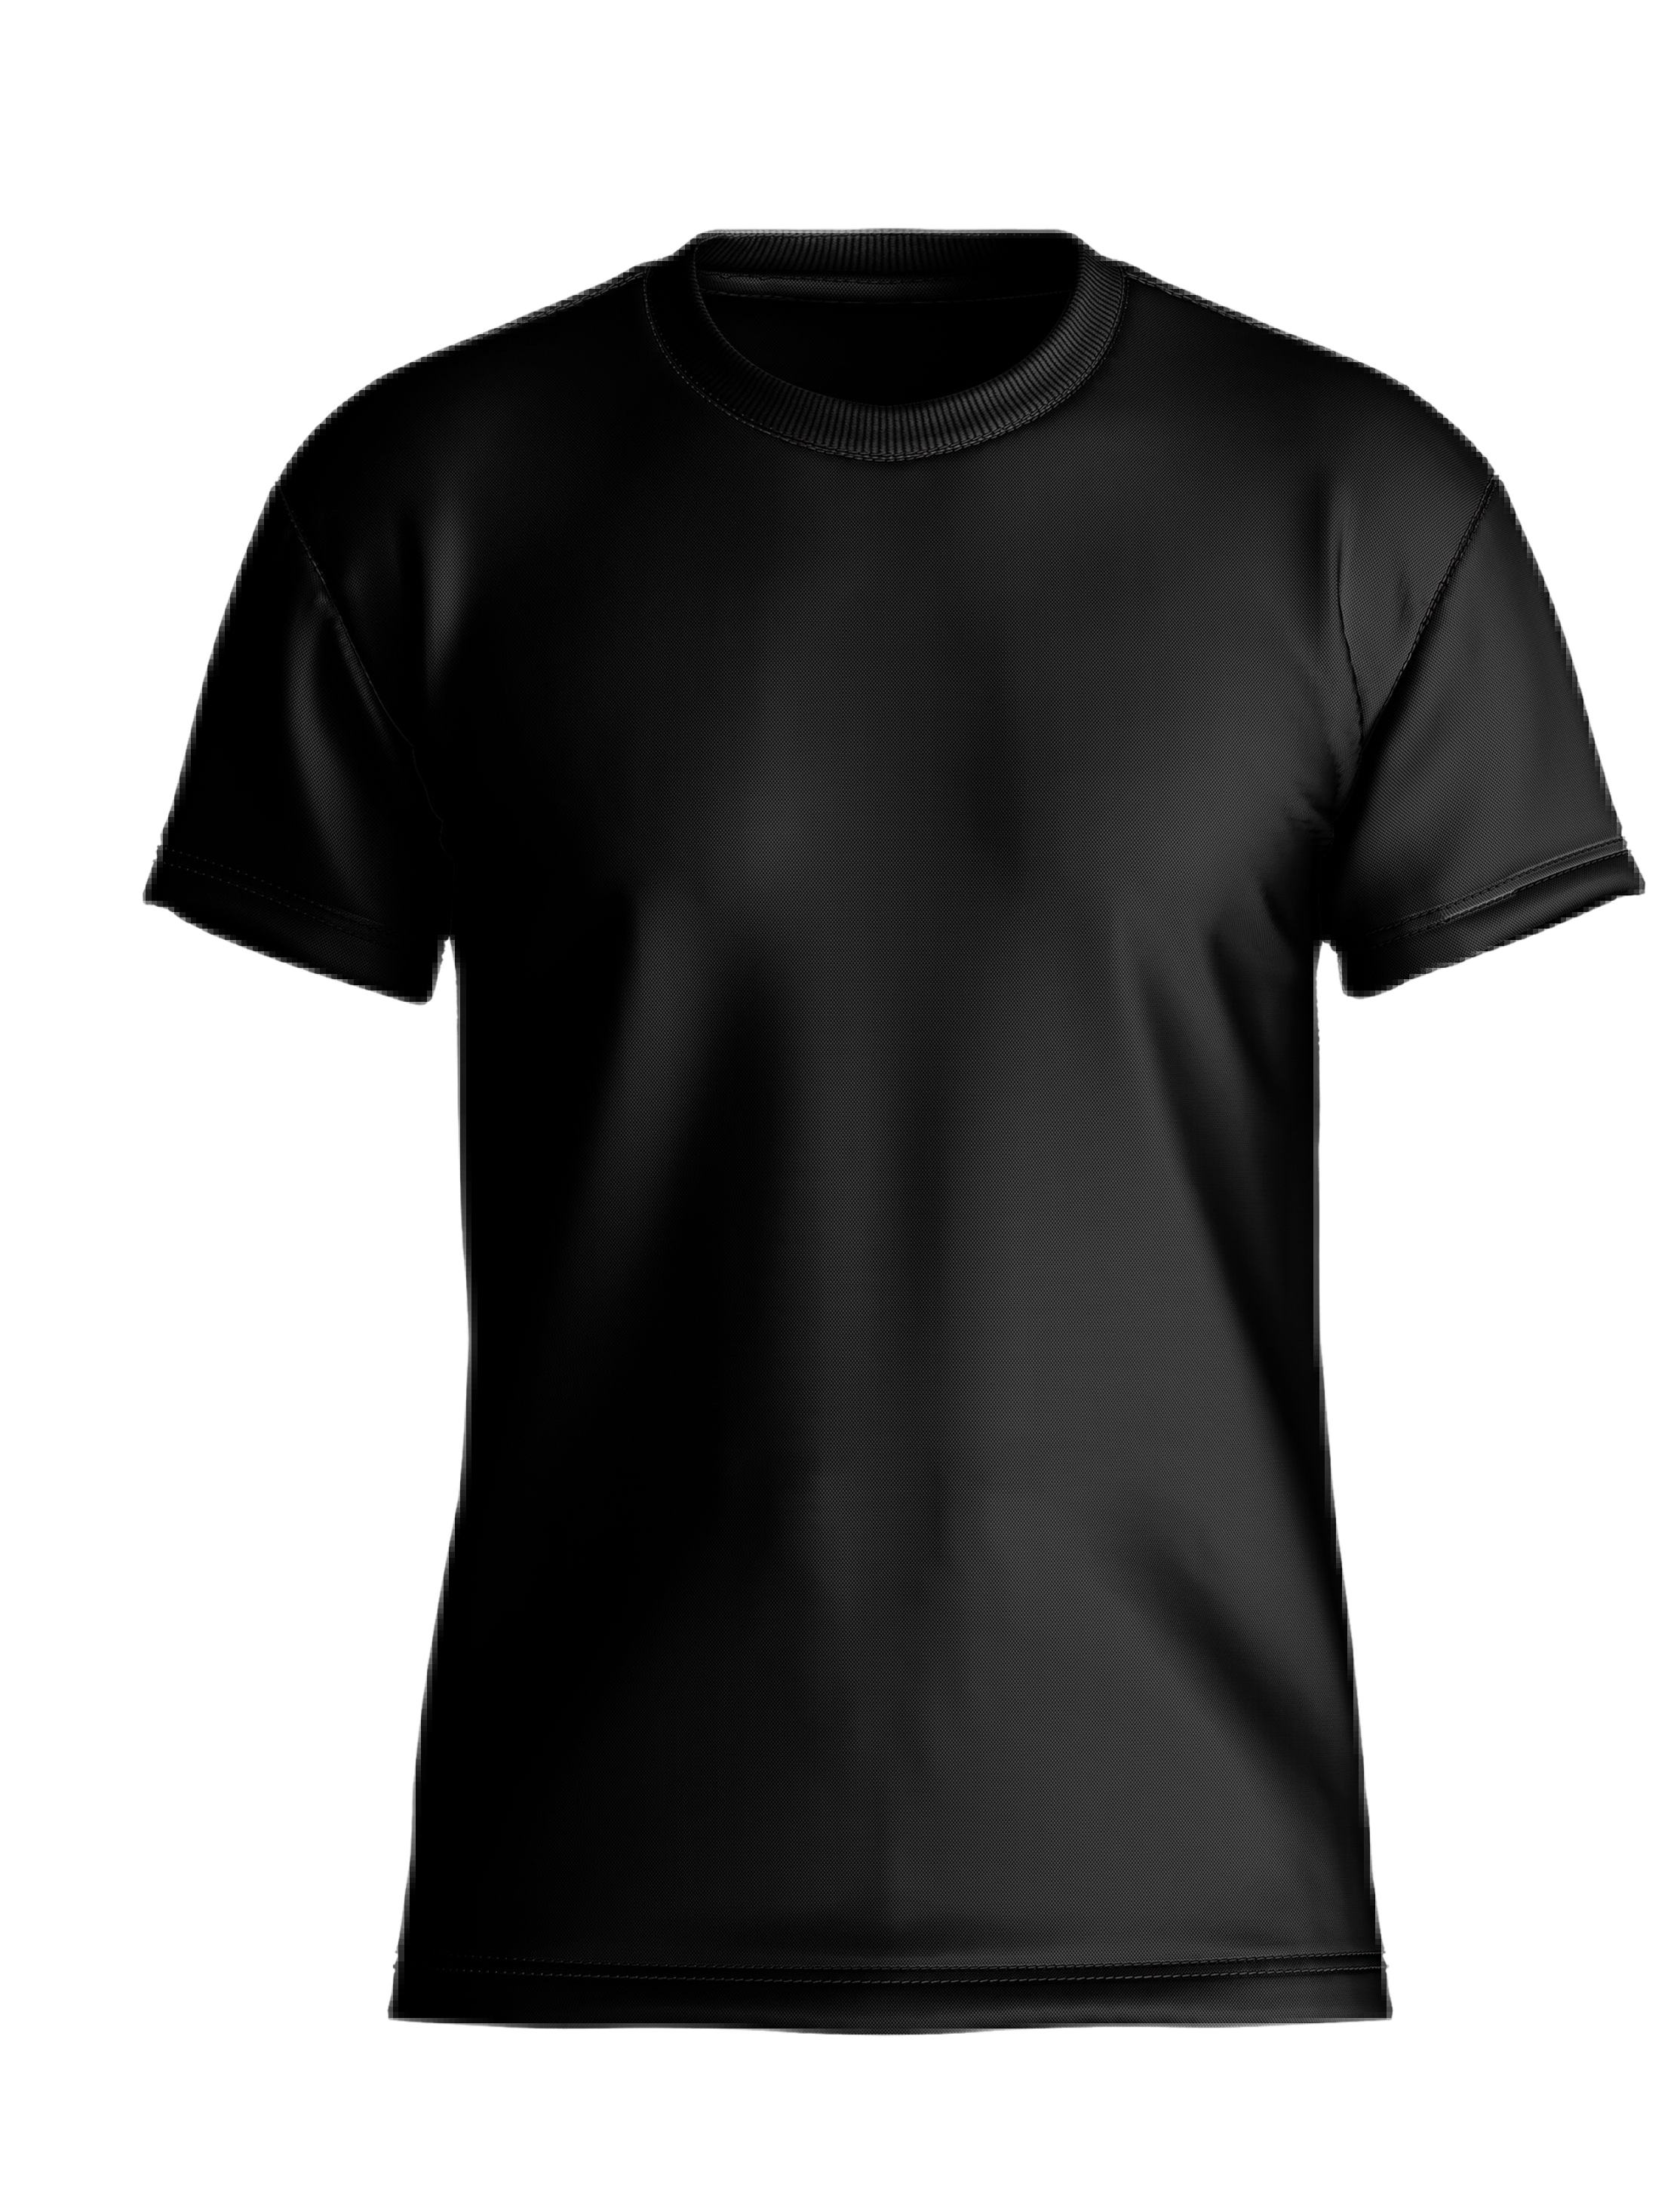 Apollo Sport - The World's Cleanest Active Shirt